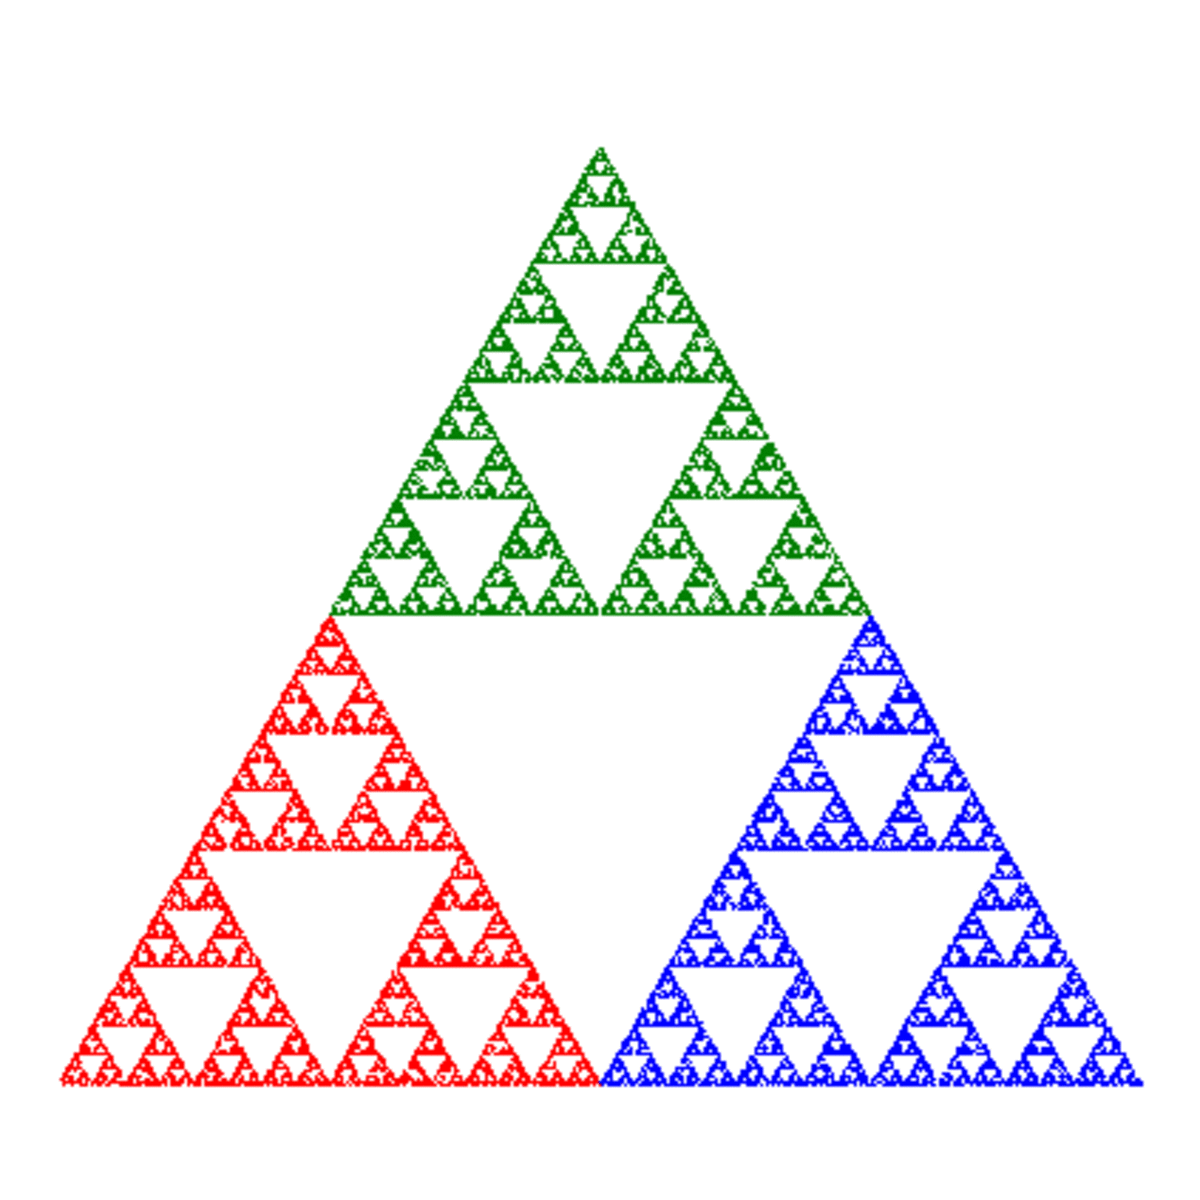 The basic design for the antenna is founded on the Sierpinski triangle that is a fractal capable of harvesting multiple frequencies of electromagnetic radiation.